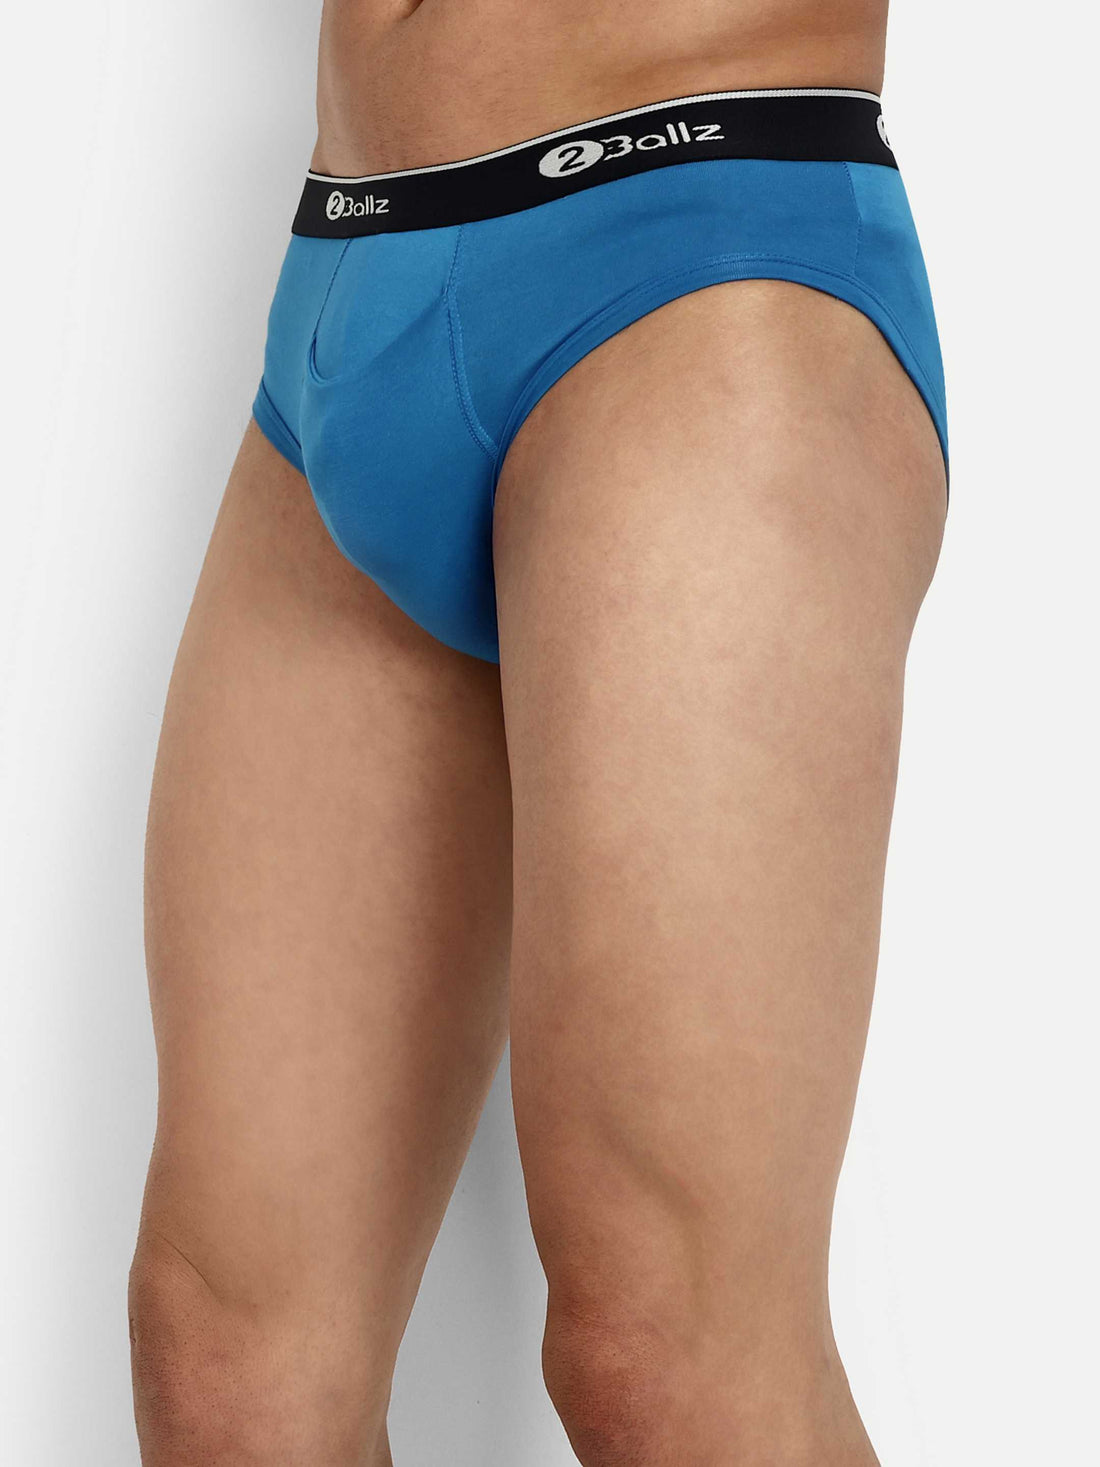 2BALLZ Regular Men's Brief with Horizontal Fly Opening Pack of 2 (Without Pouch)